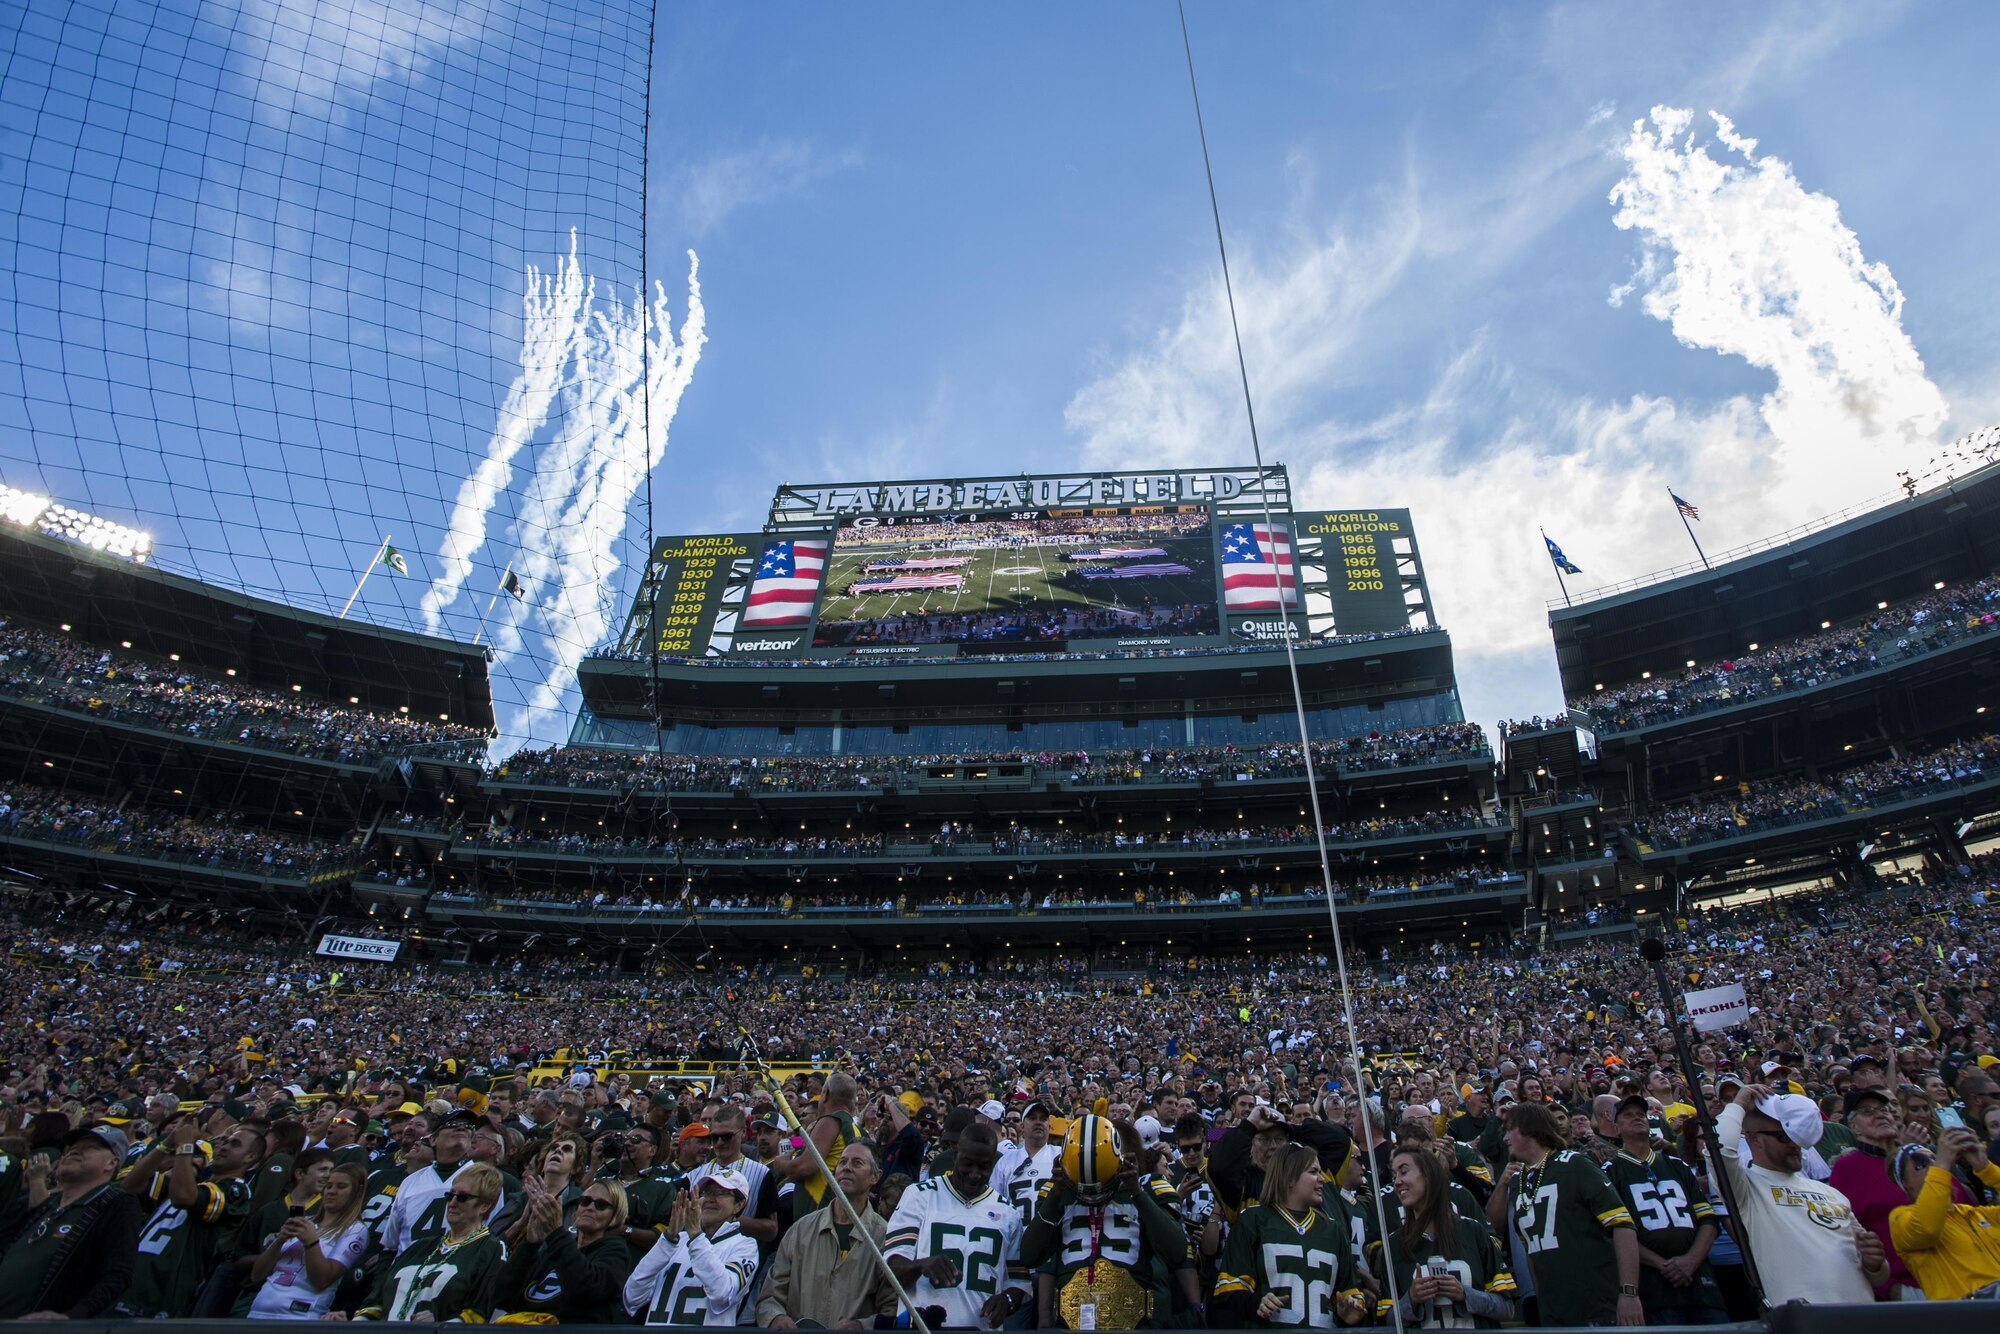 Fans celebrate following a flyover of four CV-22 Osprey aircraft at Lambeau Field, Wis., Oct. 16, 2016. During the final moments of the national anthem, Ospreys with the 8th Special Operations Squadron from Hurlburt Field flew over the stadium. The Osprey offers increased speed and range over other rotary-wing aircraft, enabling Air Force Special Operations Command aircrews to execute long-range special operations missions. (U.S. Air Force photo by Airman 1st Class Joseph Pick)